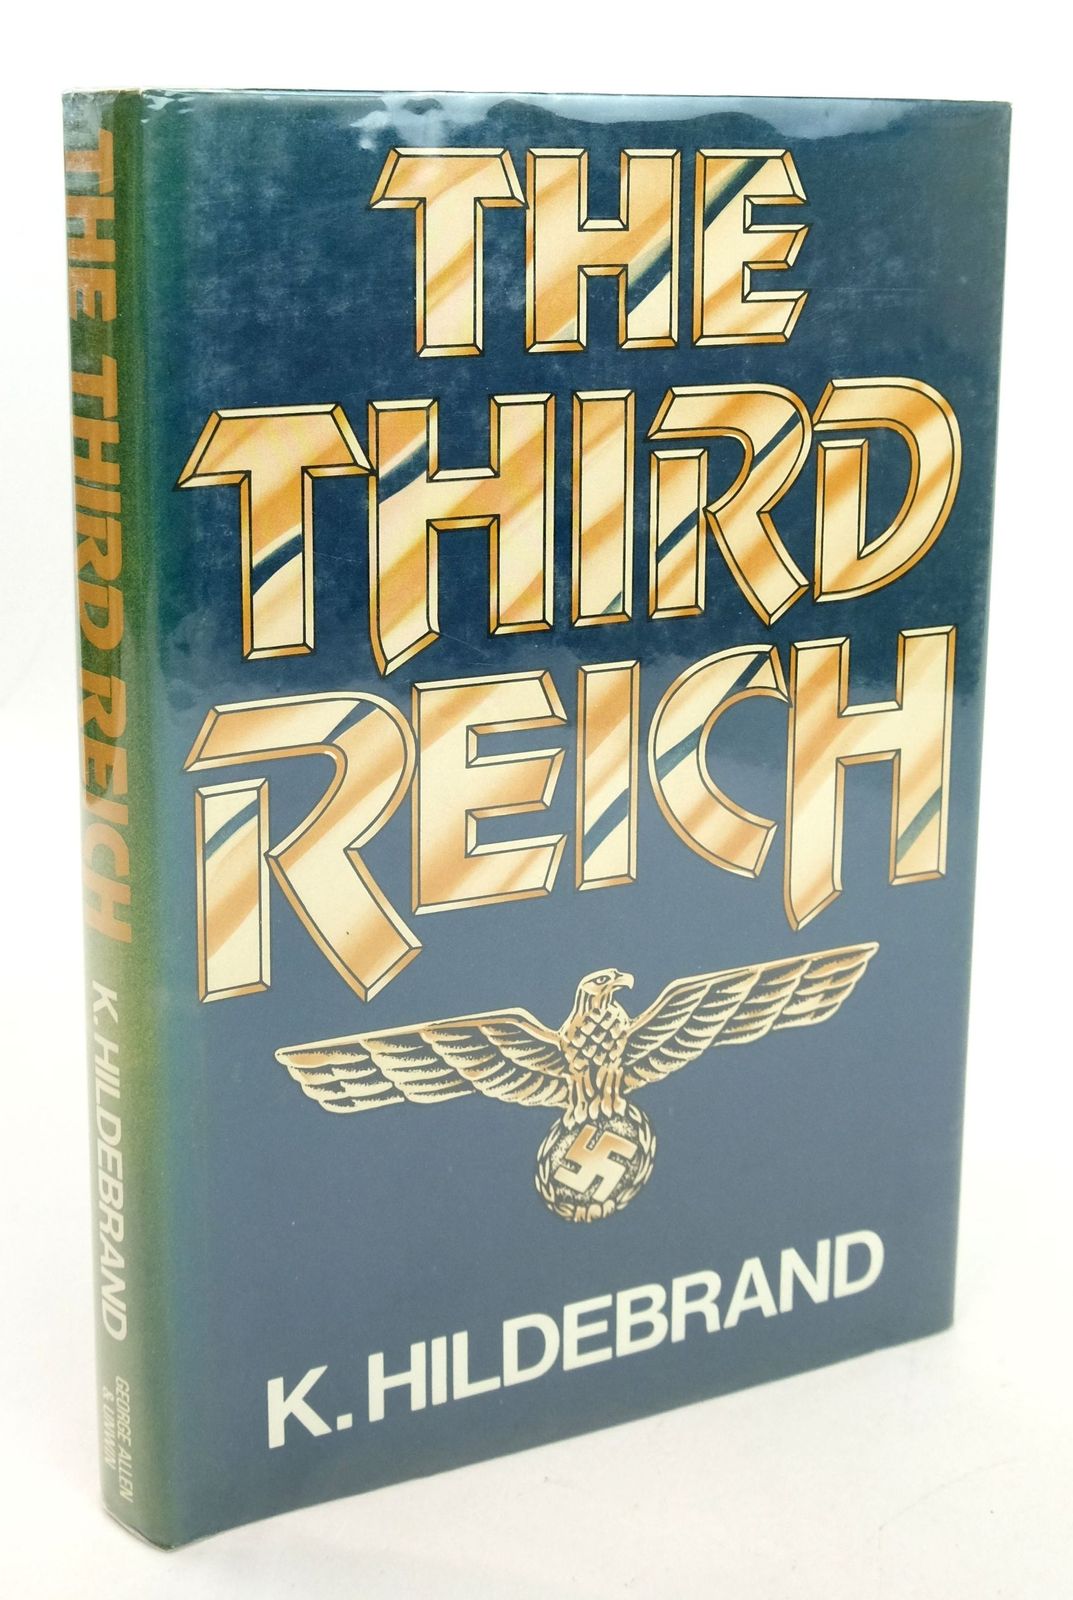 Photo of THE THIRD REICH written by Hildebrand, K. published by George Allen & Unwin (STOCK CODE: 1819406)  for sale by Stella & Rose's Books